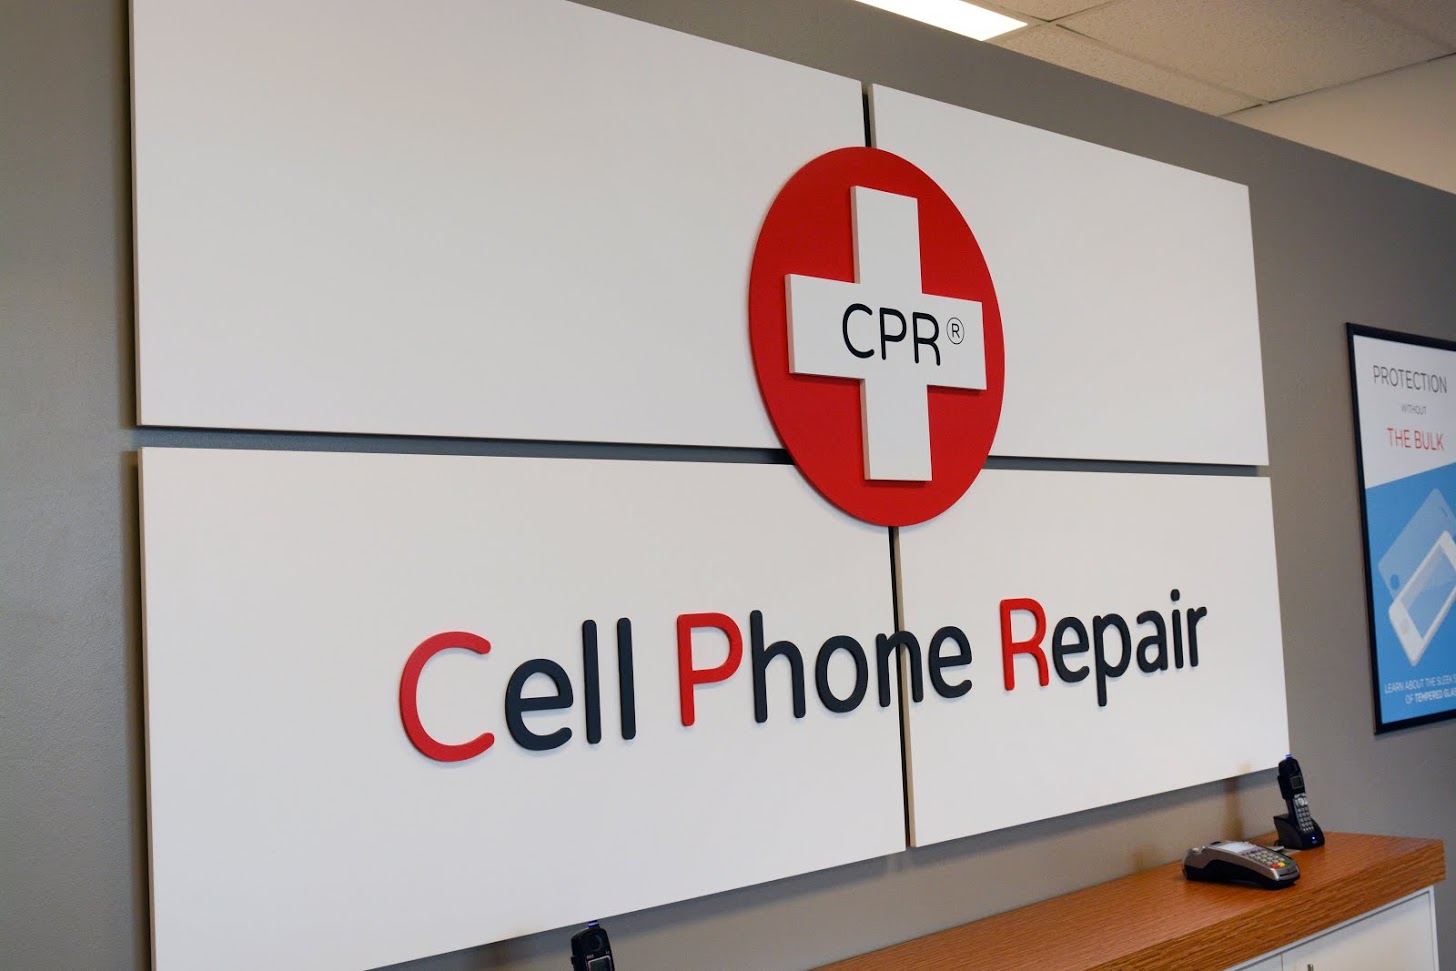 CPR Cell Phone Repair, Tuesday, February 11, 2020, Press release picture